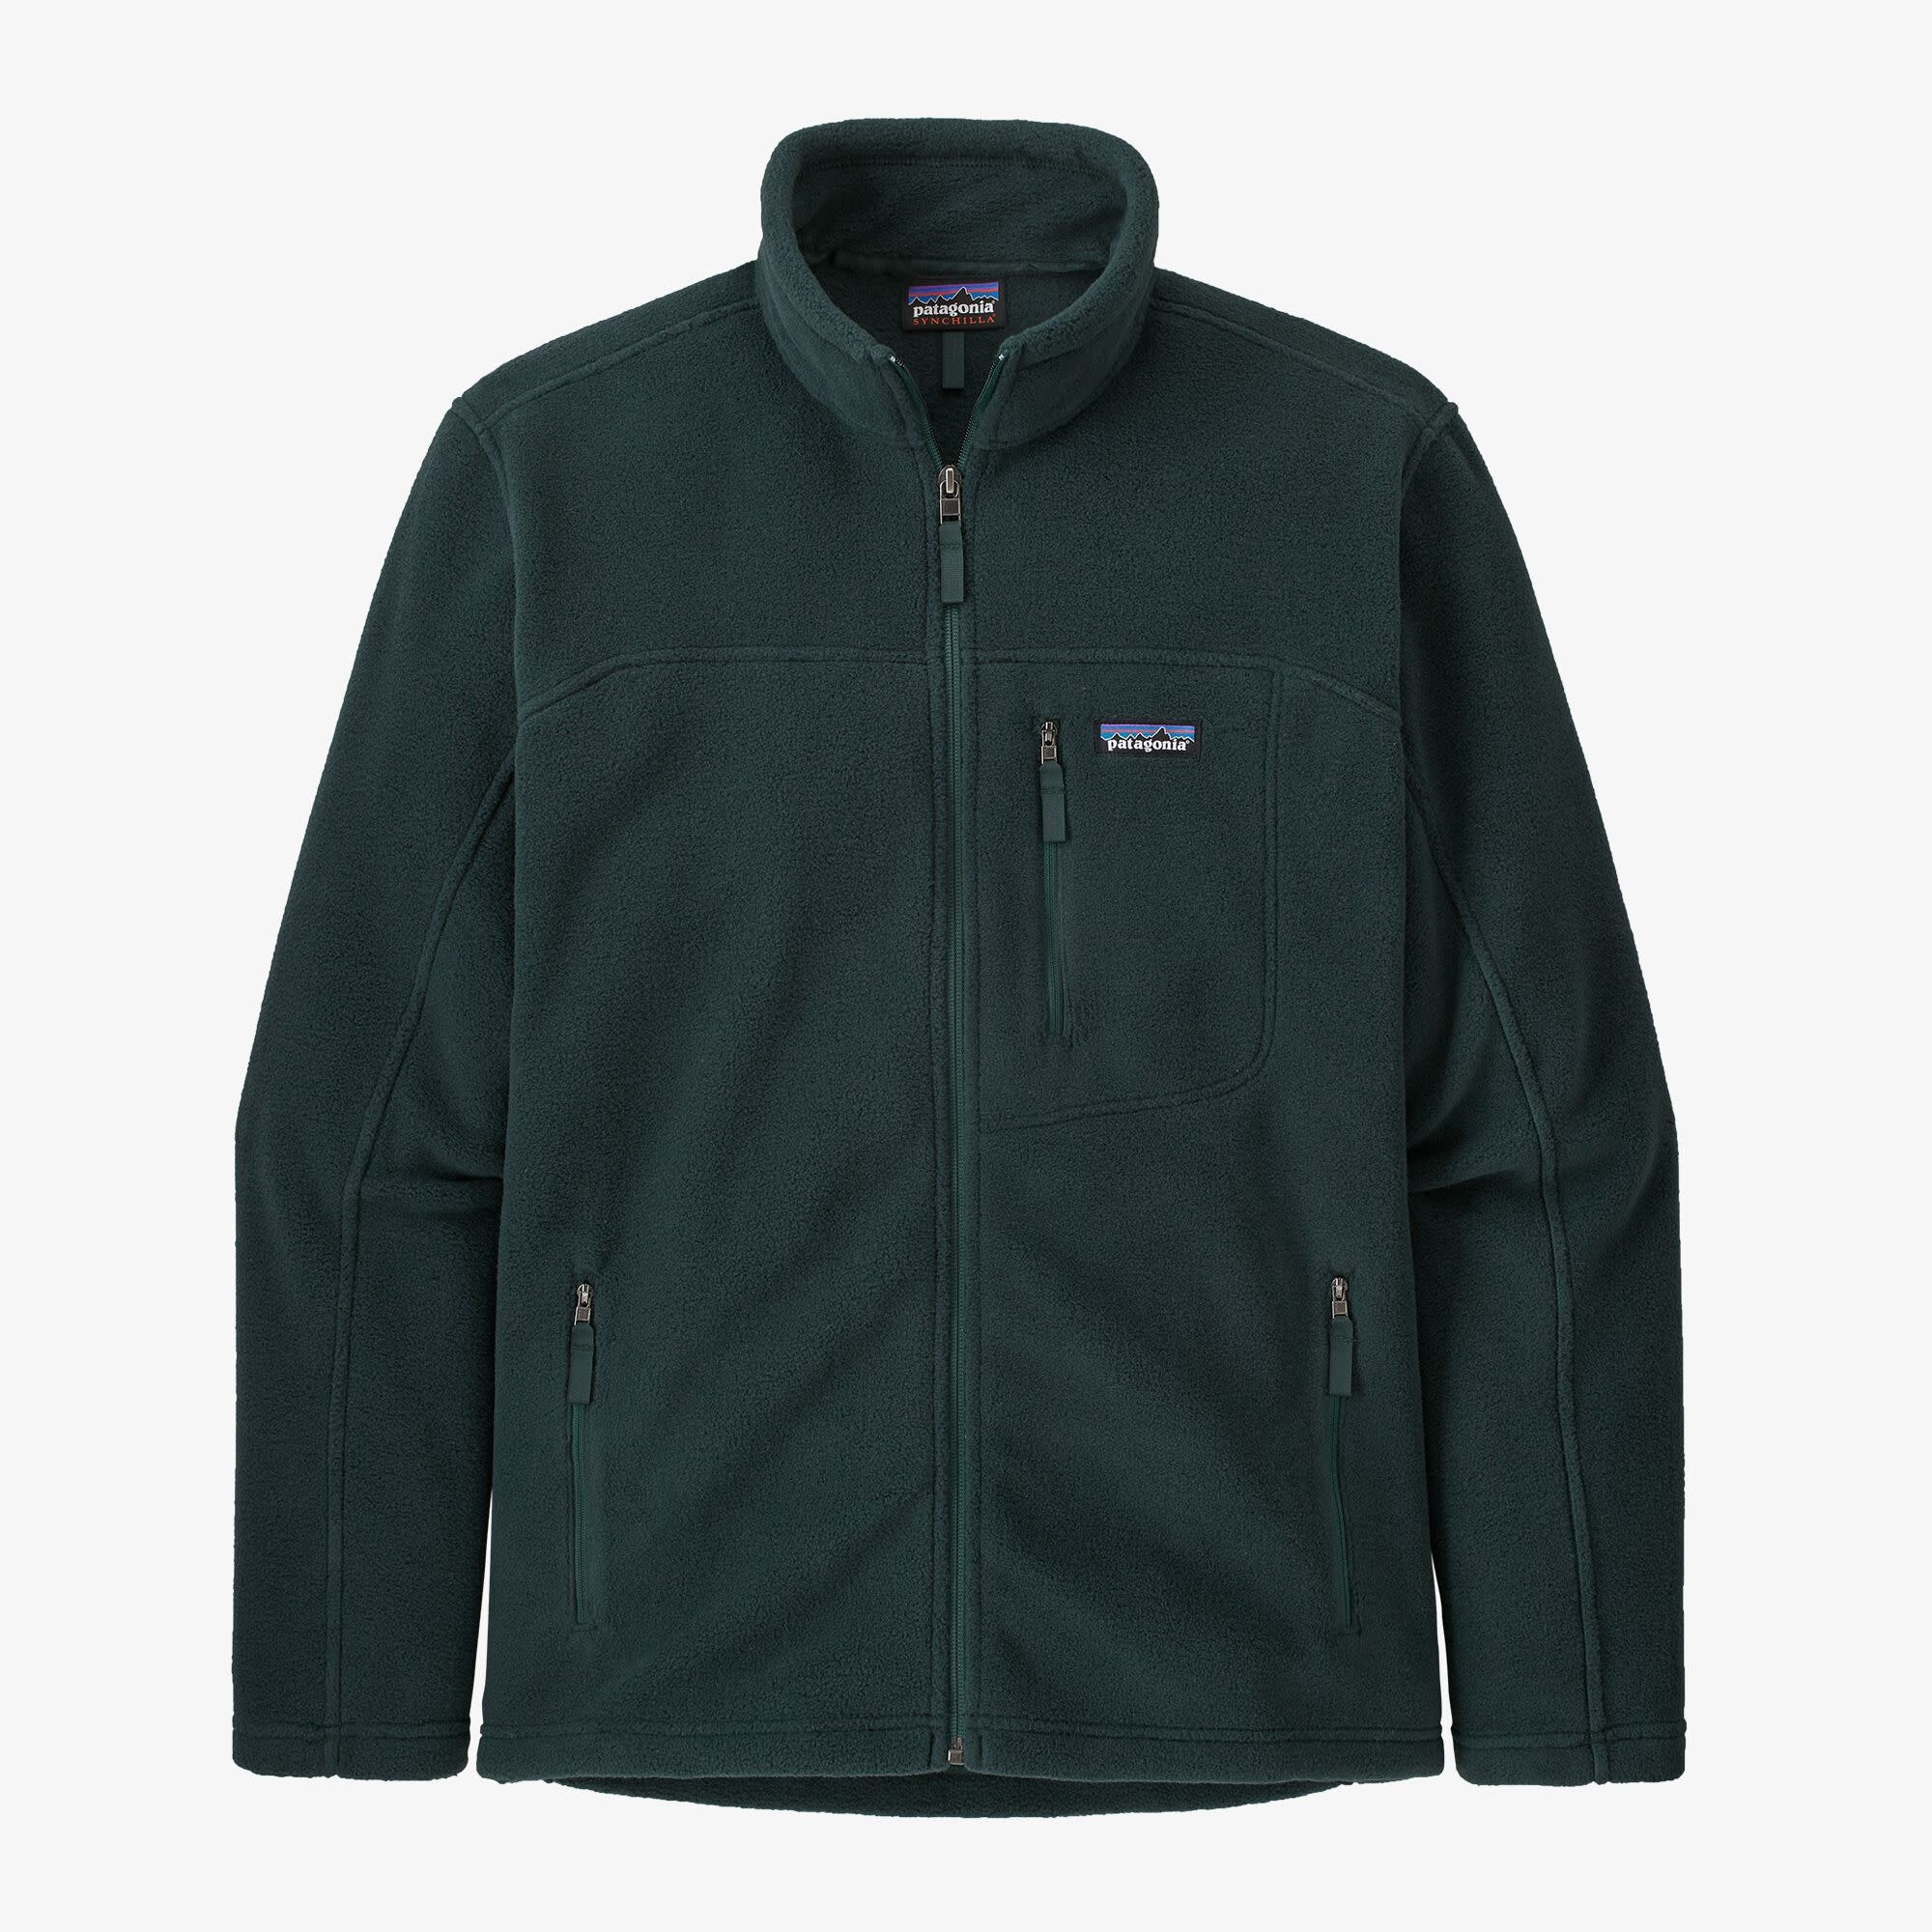 Patagonia Men's Classic Synch Jacket